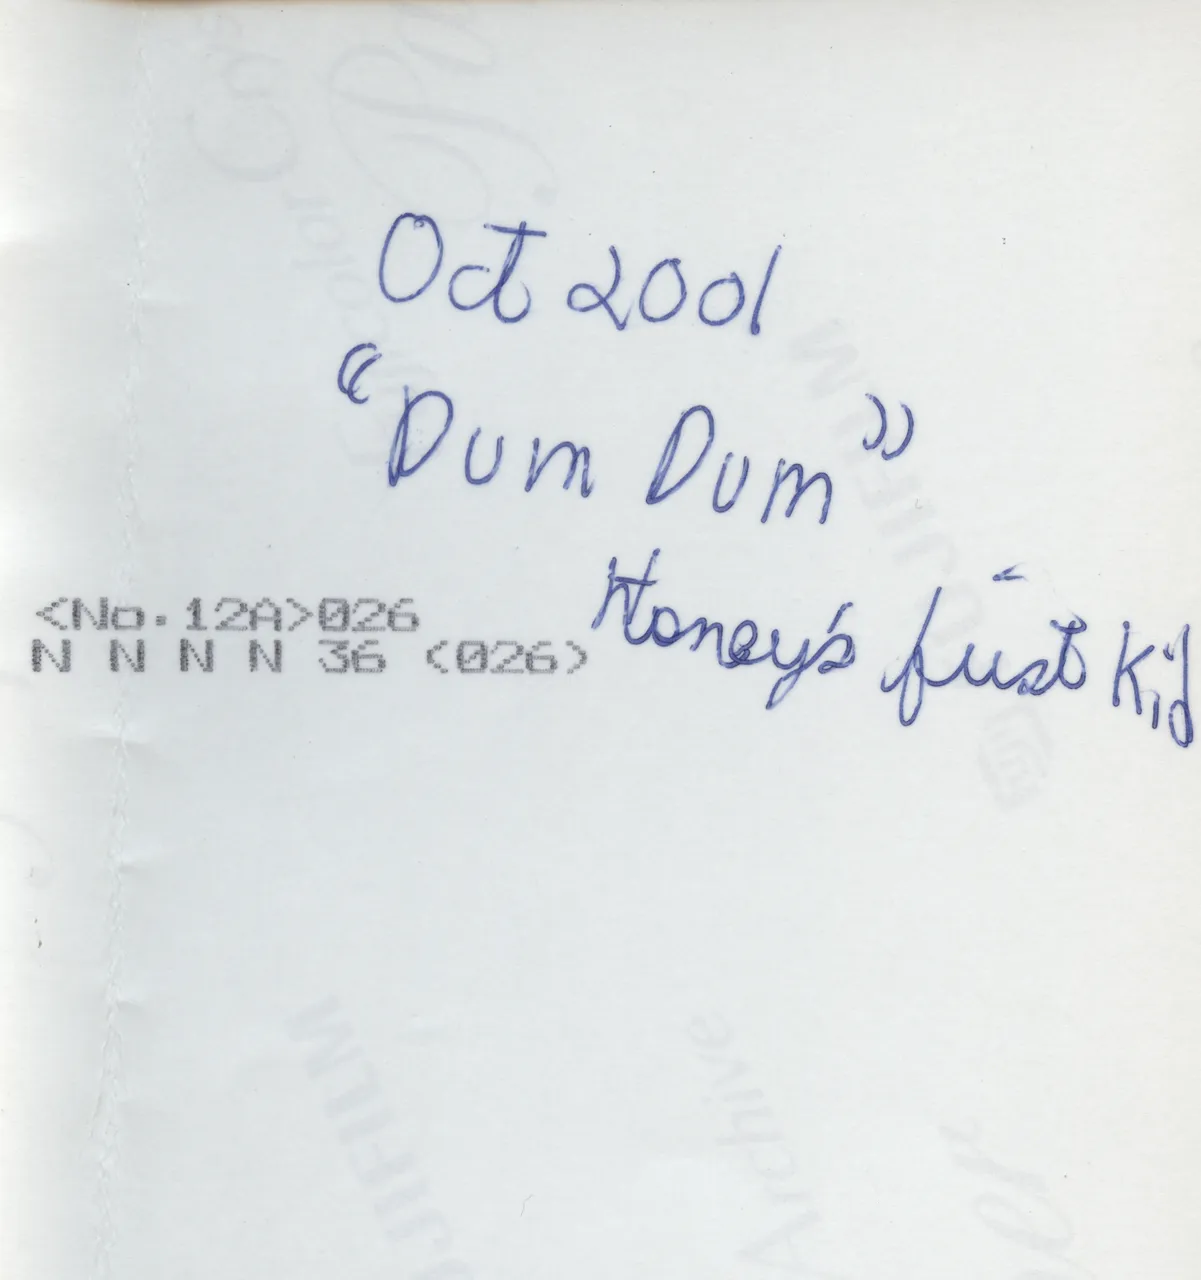 2001-10 Dumb Dumb - Honey's First Kid on Water Bucket FRONT & BACK-2.png